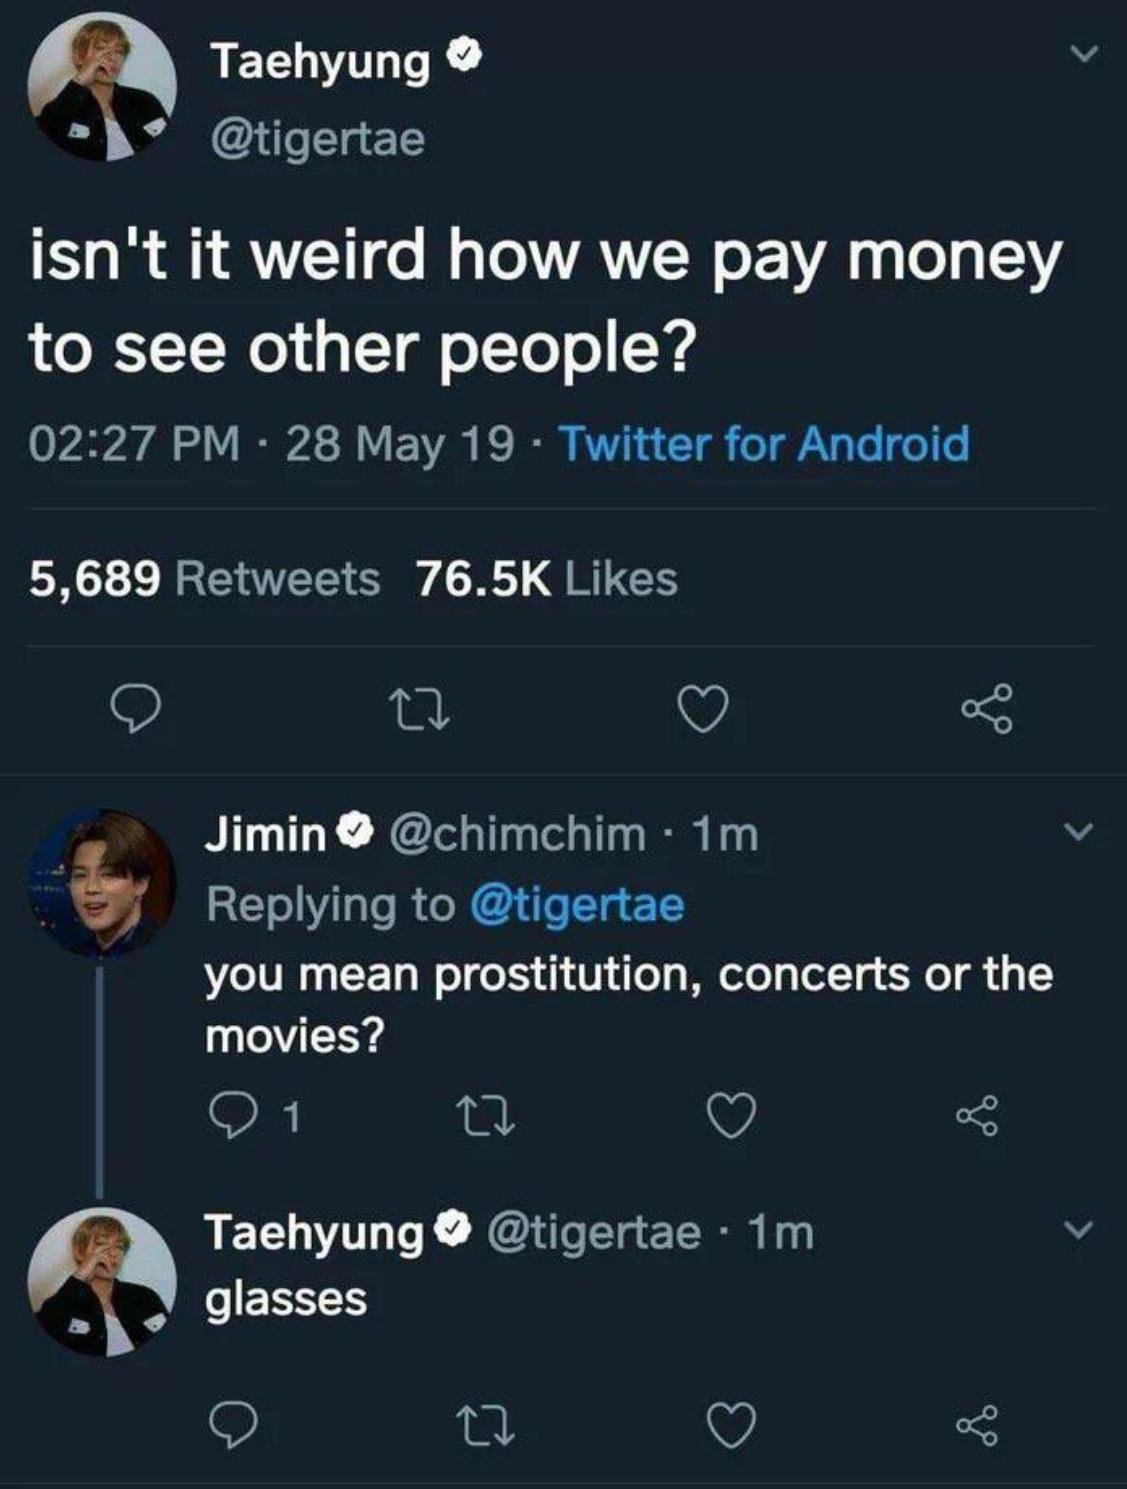 dumb and funny jokes - Taehyung isn't it weird how we pay money to see other people? 28 May 19 Twitter for Android 5,689 Jimin 1m you mean prostitution, concerts or the movies? 0 1 ot 22 o 8 .1m Taehyung glasses